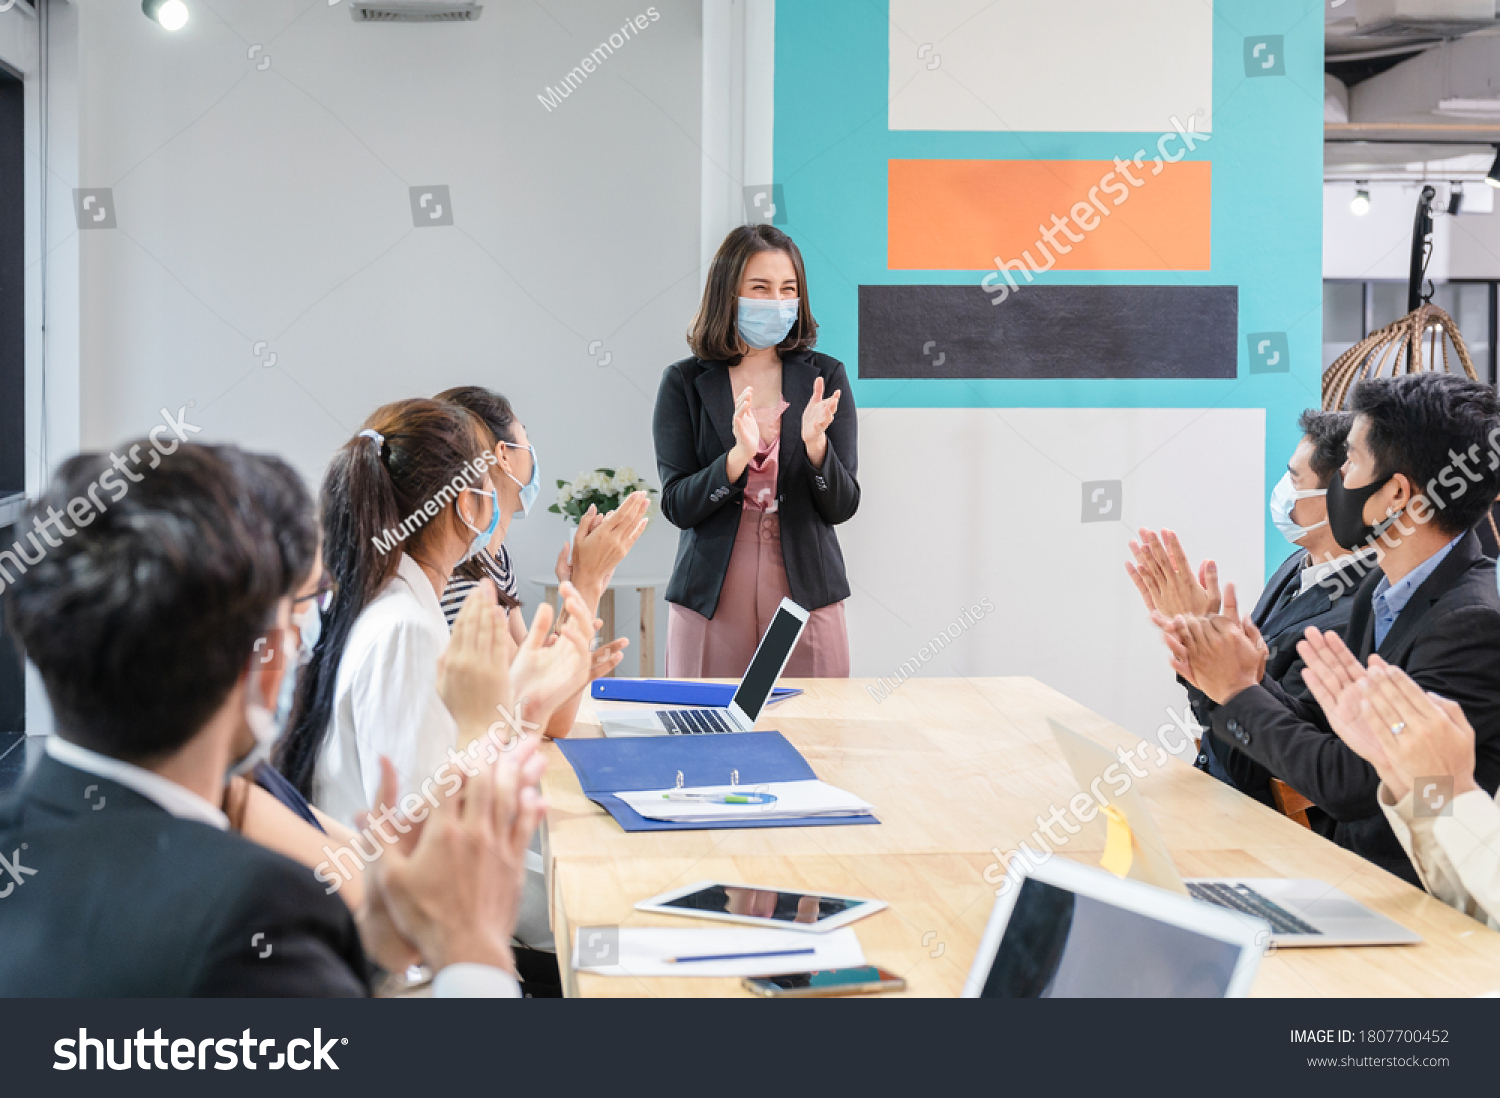 Multi ethnic colleagues celebrating with applauding the female executive while meeting in new normal office. Business team wearing face mask while pandemic of Coronavirus, Covid-19 #1807700452